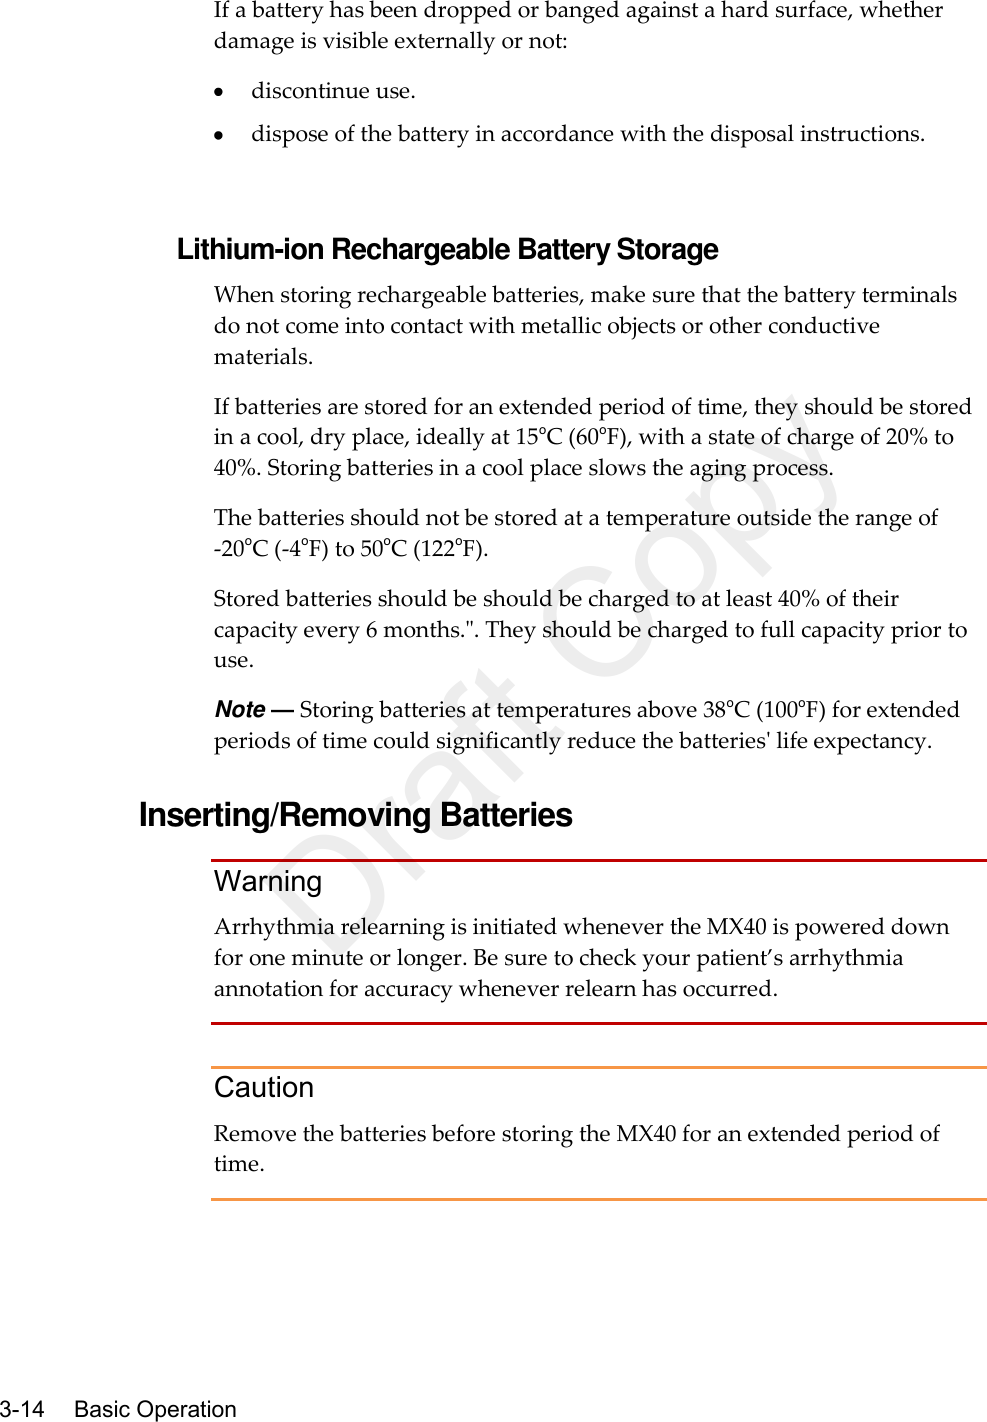    3-14    Basic Operation  If a battery has been dropped or banged against a hard surface, whether damage is visible externally or not:  discontinue use.  dispose of the battery in accordance with the disposal instructions.   Lithium-ion Rechargeable Battery Storage When storing rechargeable batteries, make sure that the battery terminals do not come into contact with metallic objects or other conductive materials. If batteries are stored for an extended period of time, they should be stored in a cool, dry place, ideally at 15oC (60oF), with a state of charge of 20% to 40%. Storing batteries in a cool place slows the aging process.   The batteries should not be stored at a temperature outside the range of -20oC (-4oF) to 50oC (122oF). Stored batteries should be should be charged to at least 40% of their capacity every 6 months.&quot;. They should be charged to full capacity prior to use. Note — Storing batteries at temperatures above 38oC (100oF) for extended periods of time could significantly reduce the batteries&apos; life expectancy.  Inserting/Removing Batteries Warning Arrhythmia relearning is initiated whenever the MX40 is powered down for one minute or longer. Be sure to check your patient’s arrhythmia annotation for accuracy whenever relearn has occurred.  Caution Remove the batteries before storing the MX40 for an extended period of time.  Draft Copy